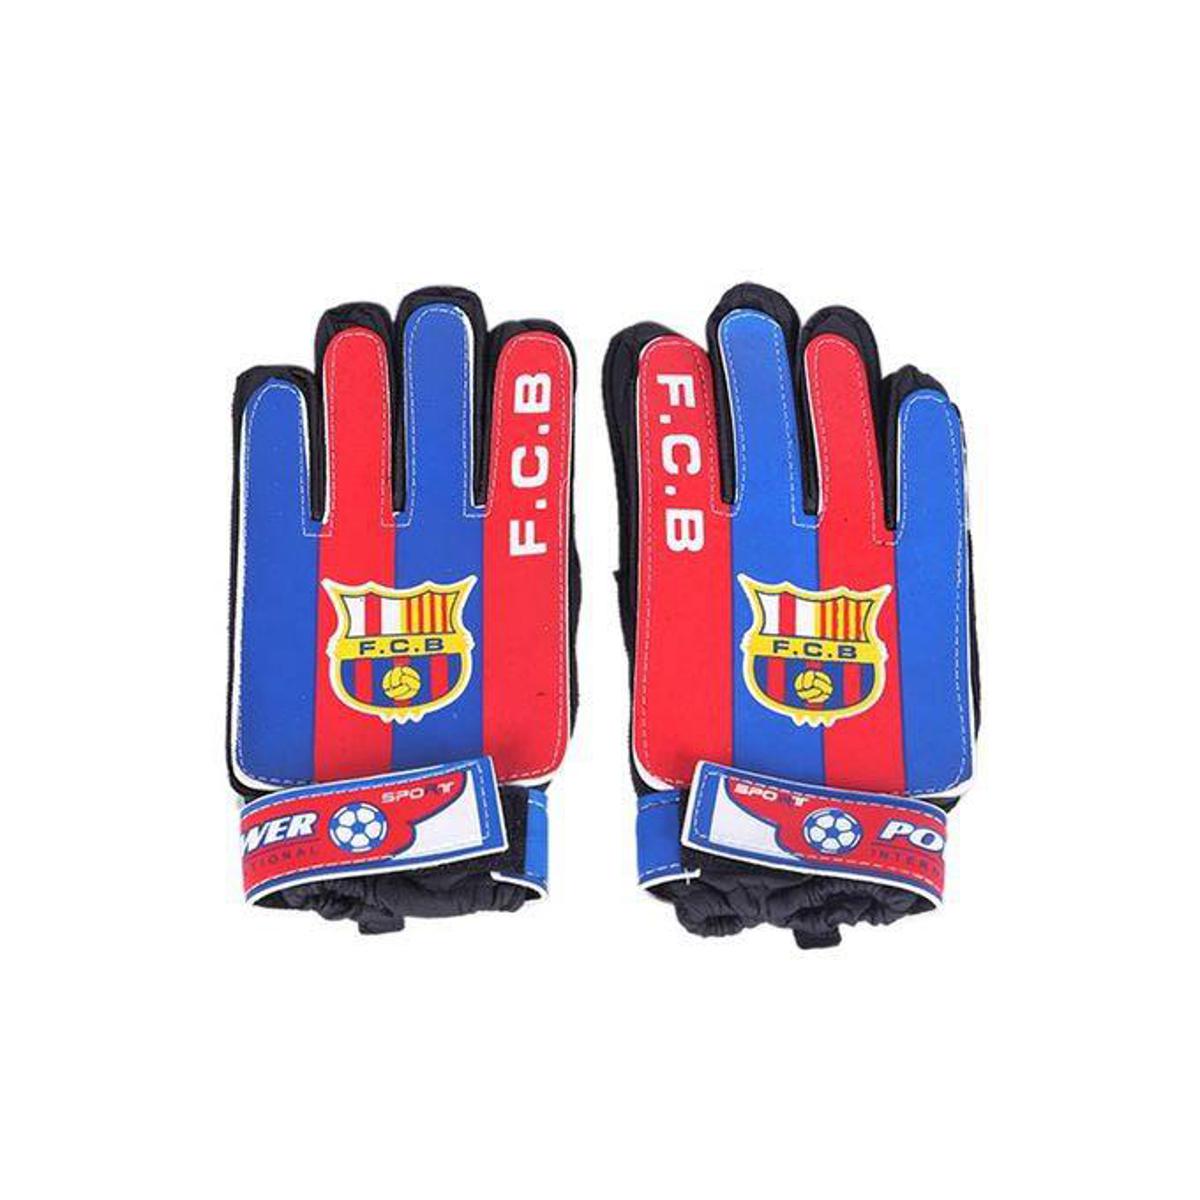 Football Hand Gloves - Multi Color